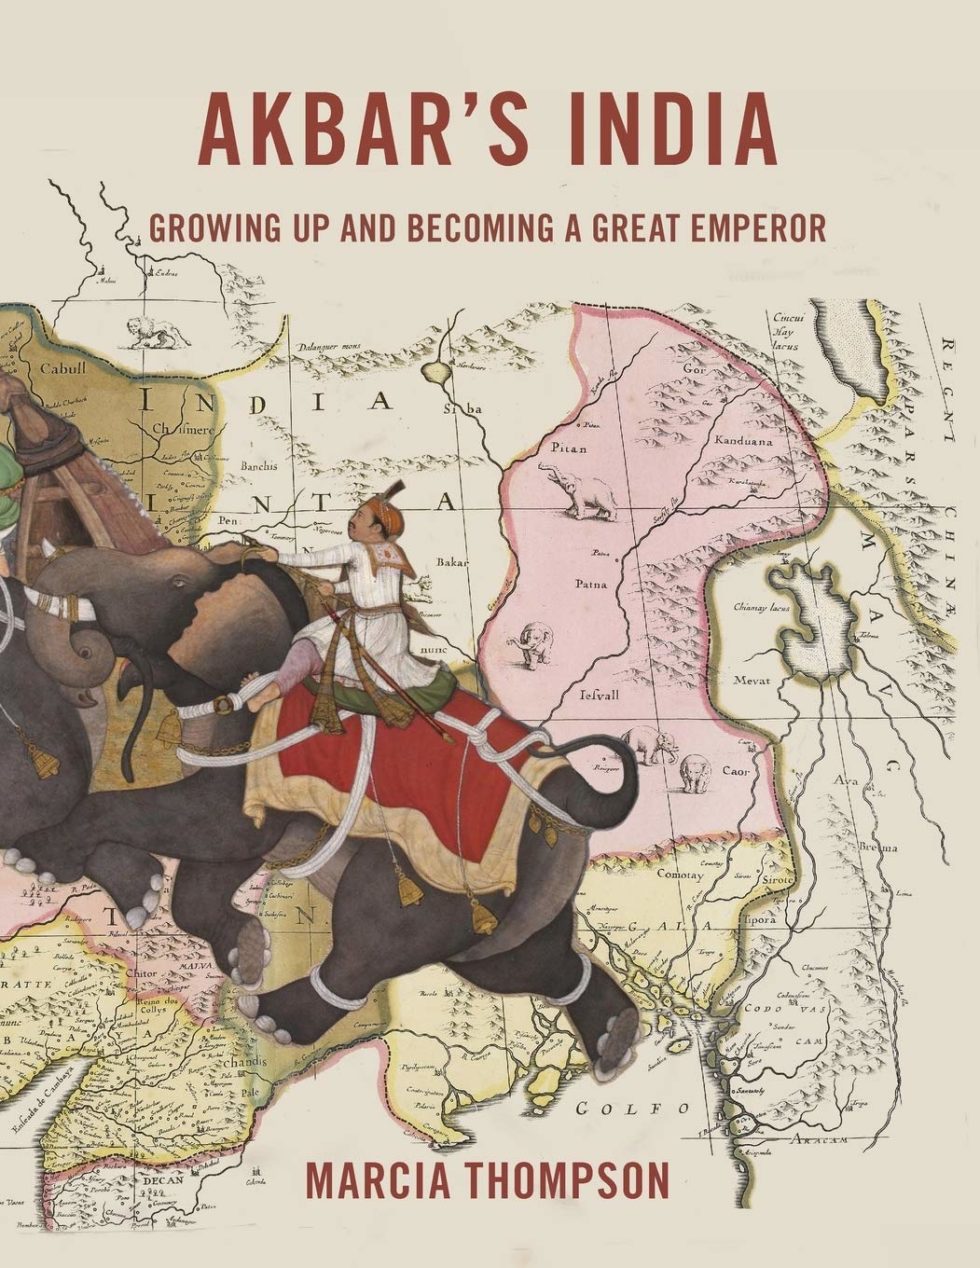 Akbar’s India: Growing up and becoming a great emperor